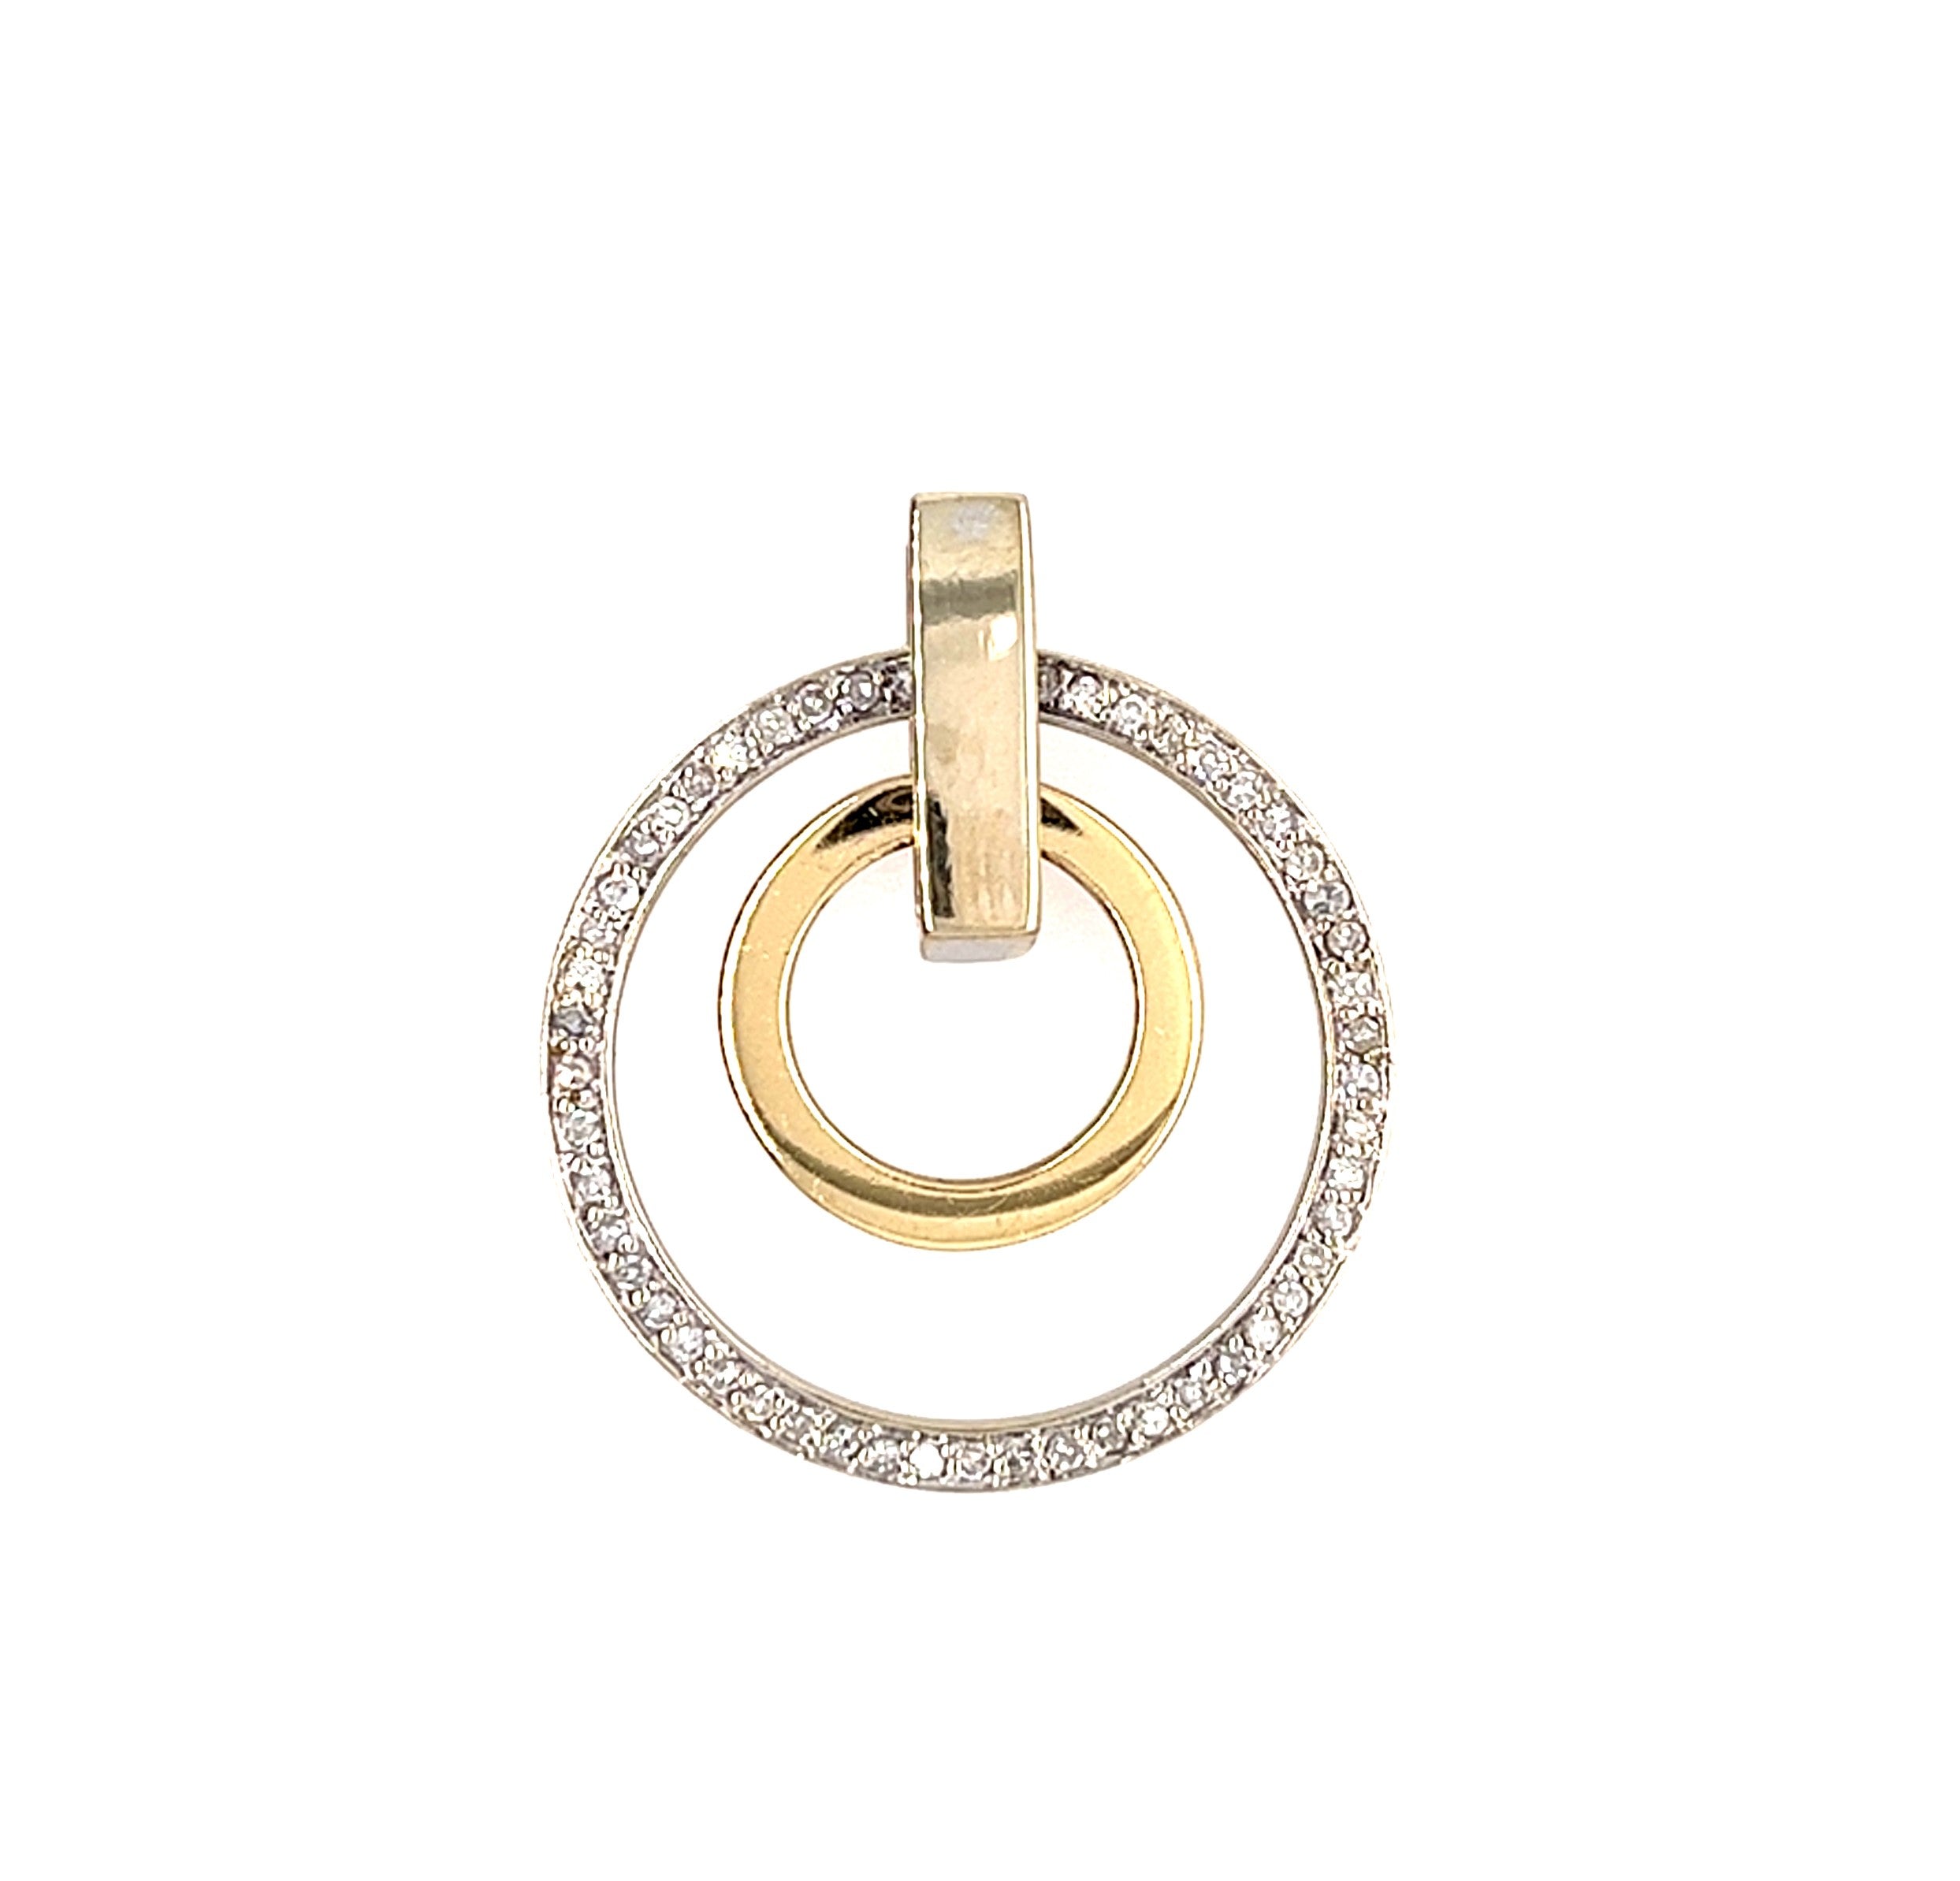 14KT YELLOW GOLD ORBIT PENDANT WITH A RING OF DIAMONDS